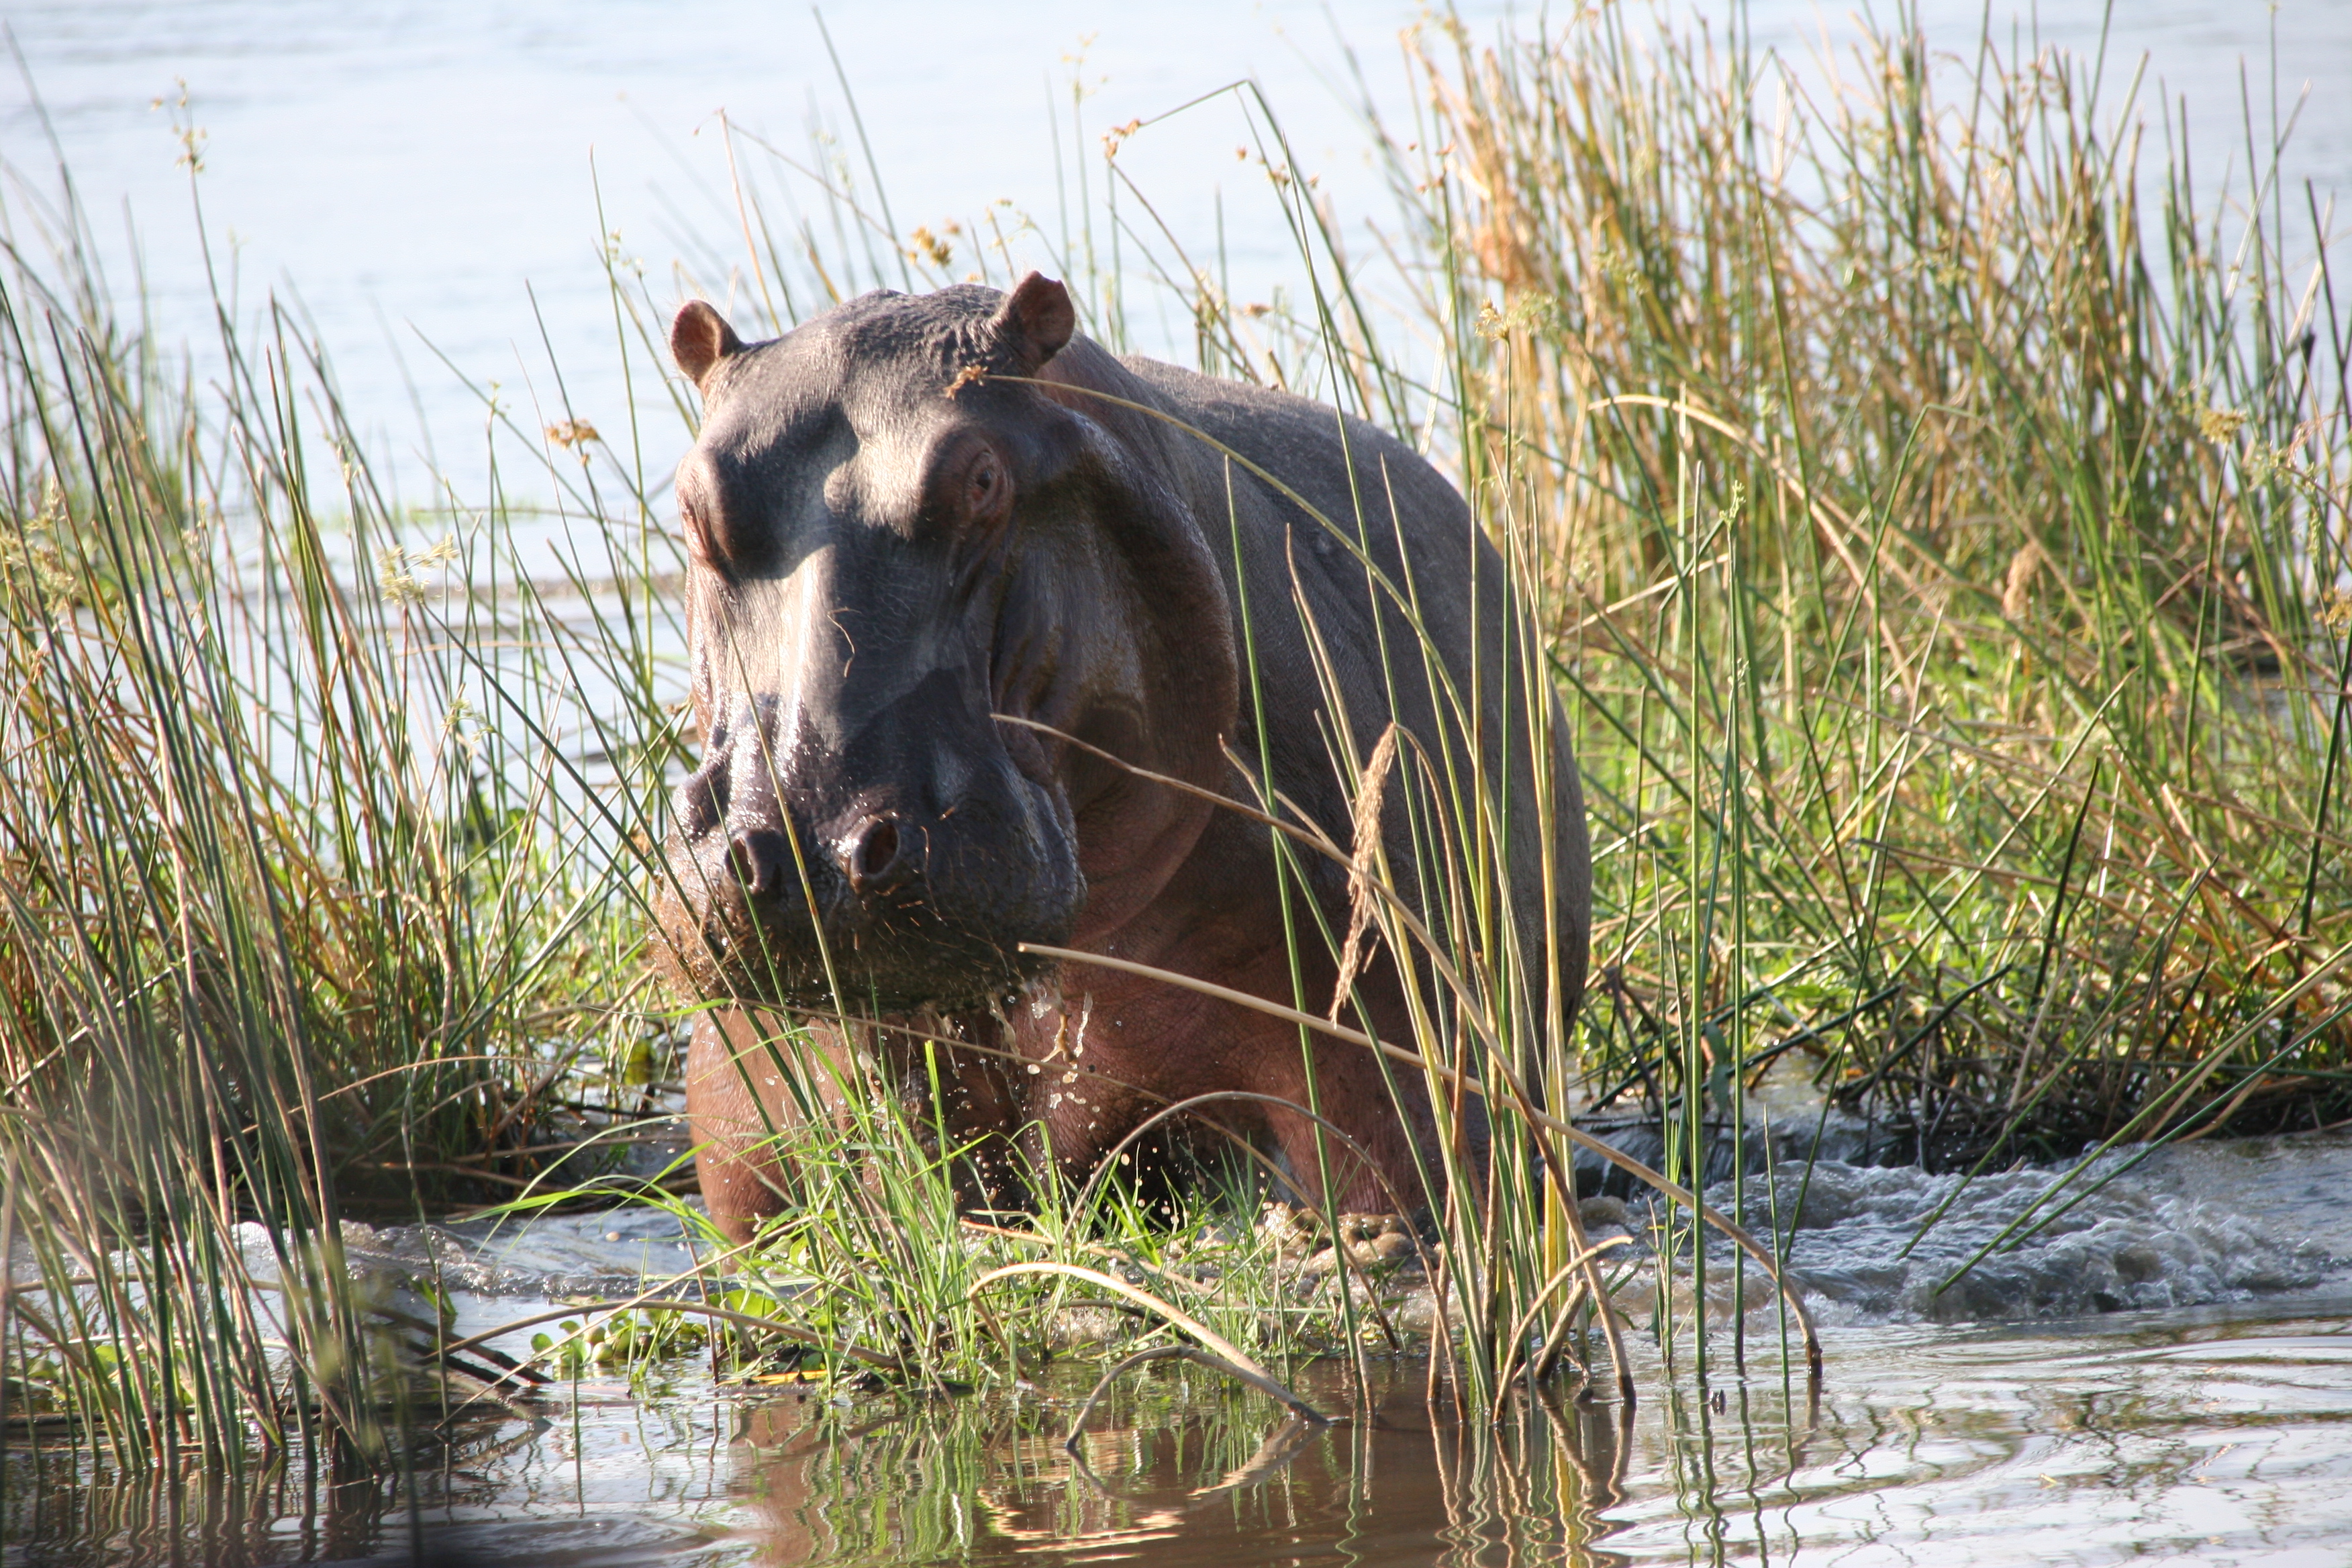 A hippo emerges from the Zambezi at Mana Pools in northern Zimbabwe. The area, part of a World Heritage Site. Image Credit: Terry Feuerborn, Creative Commons via Flickr.